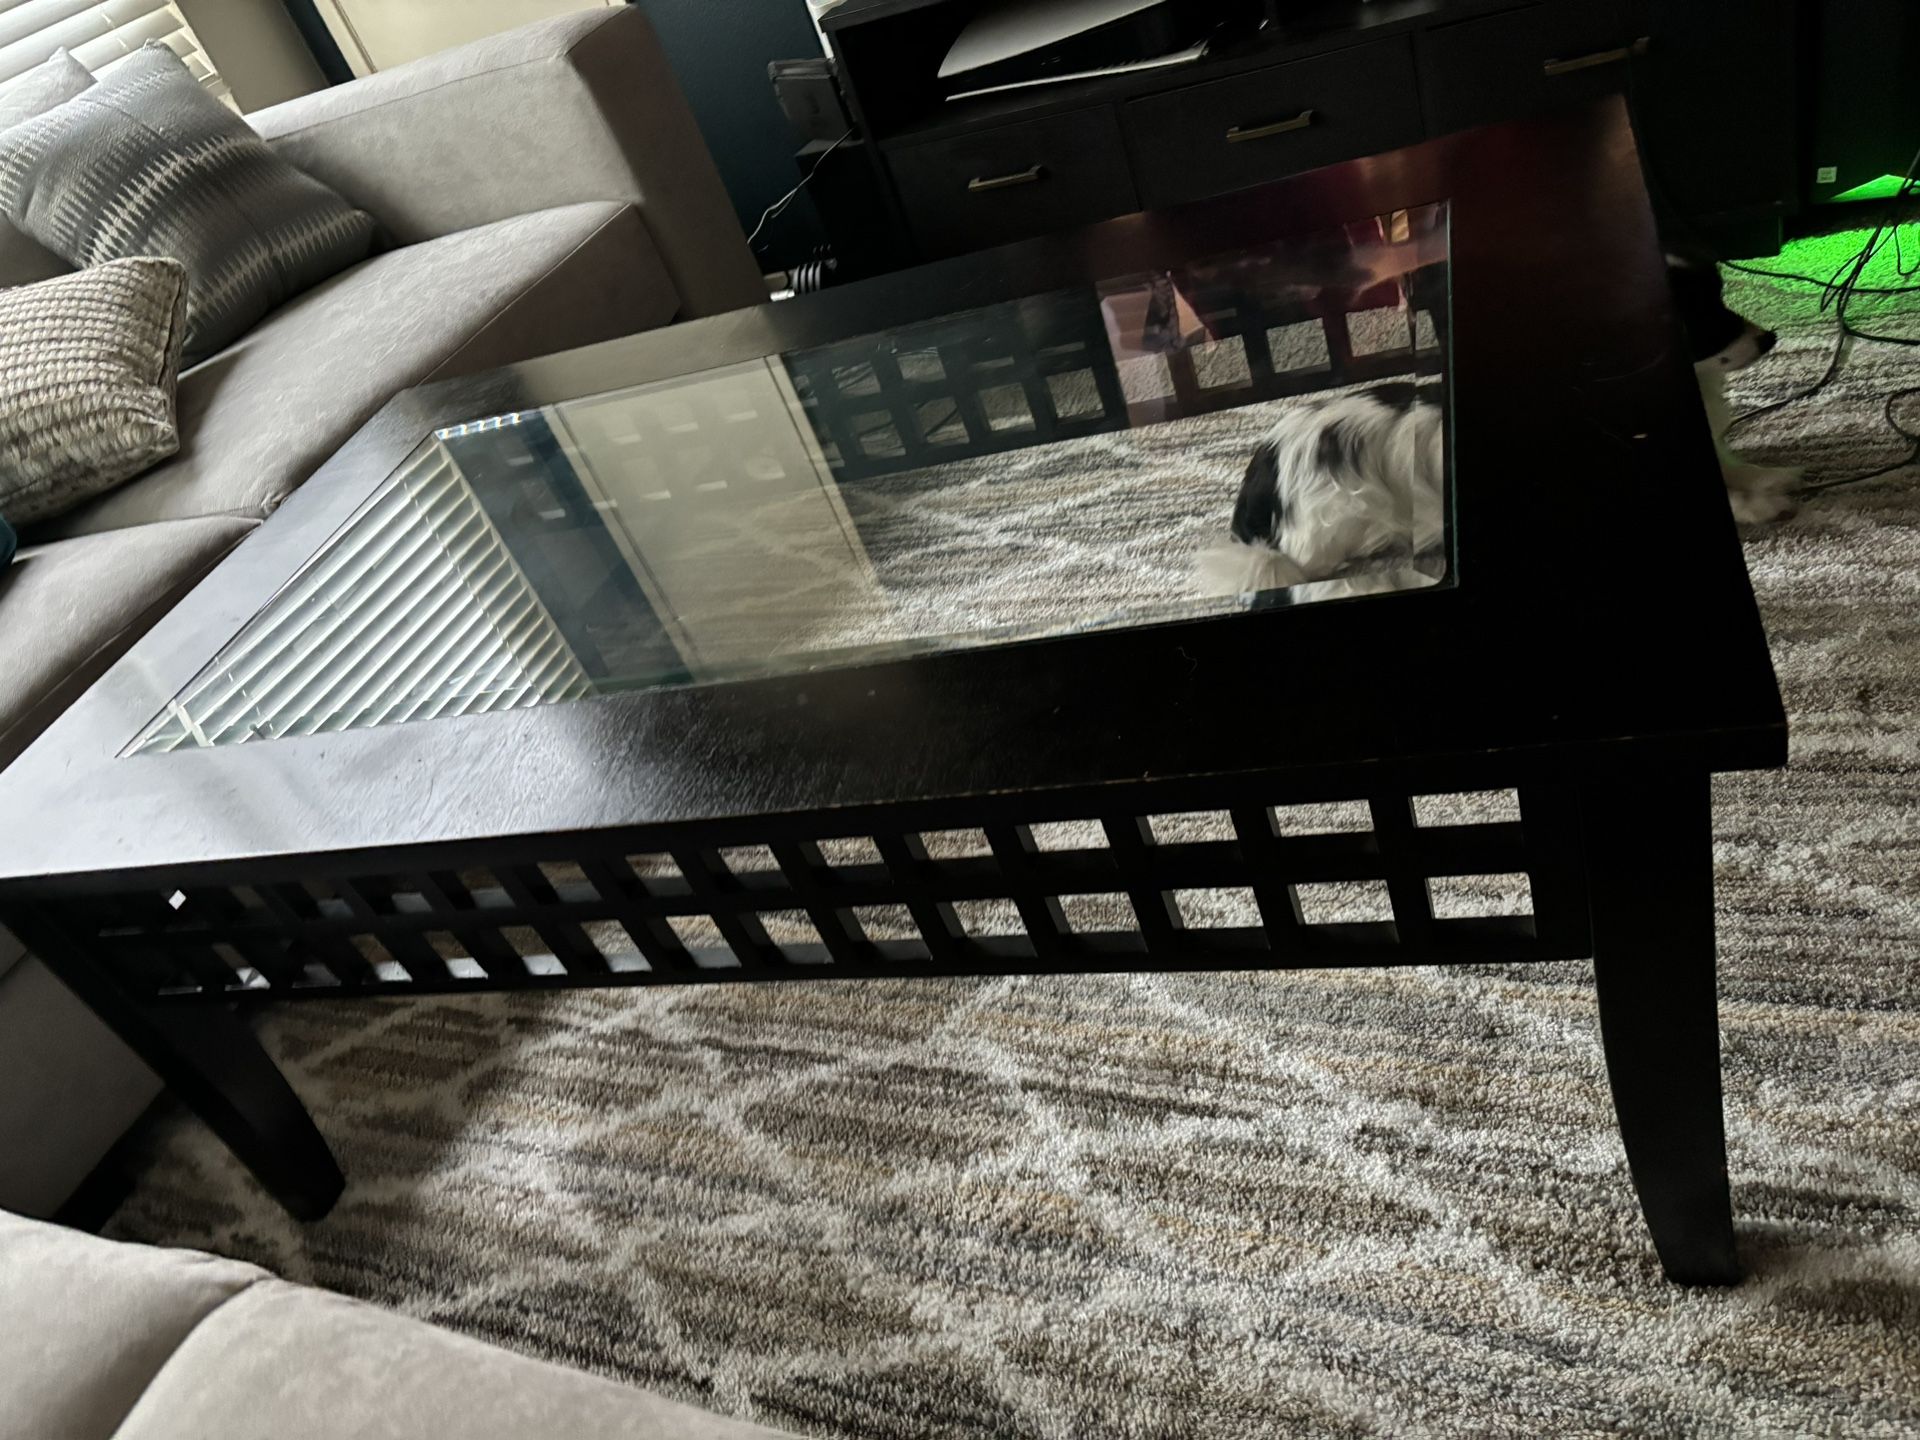 coffee table blk 